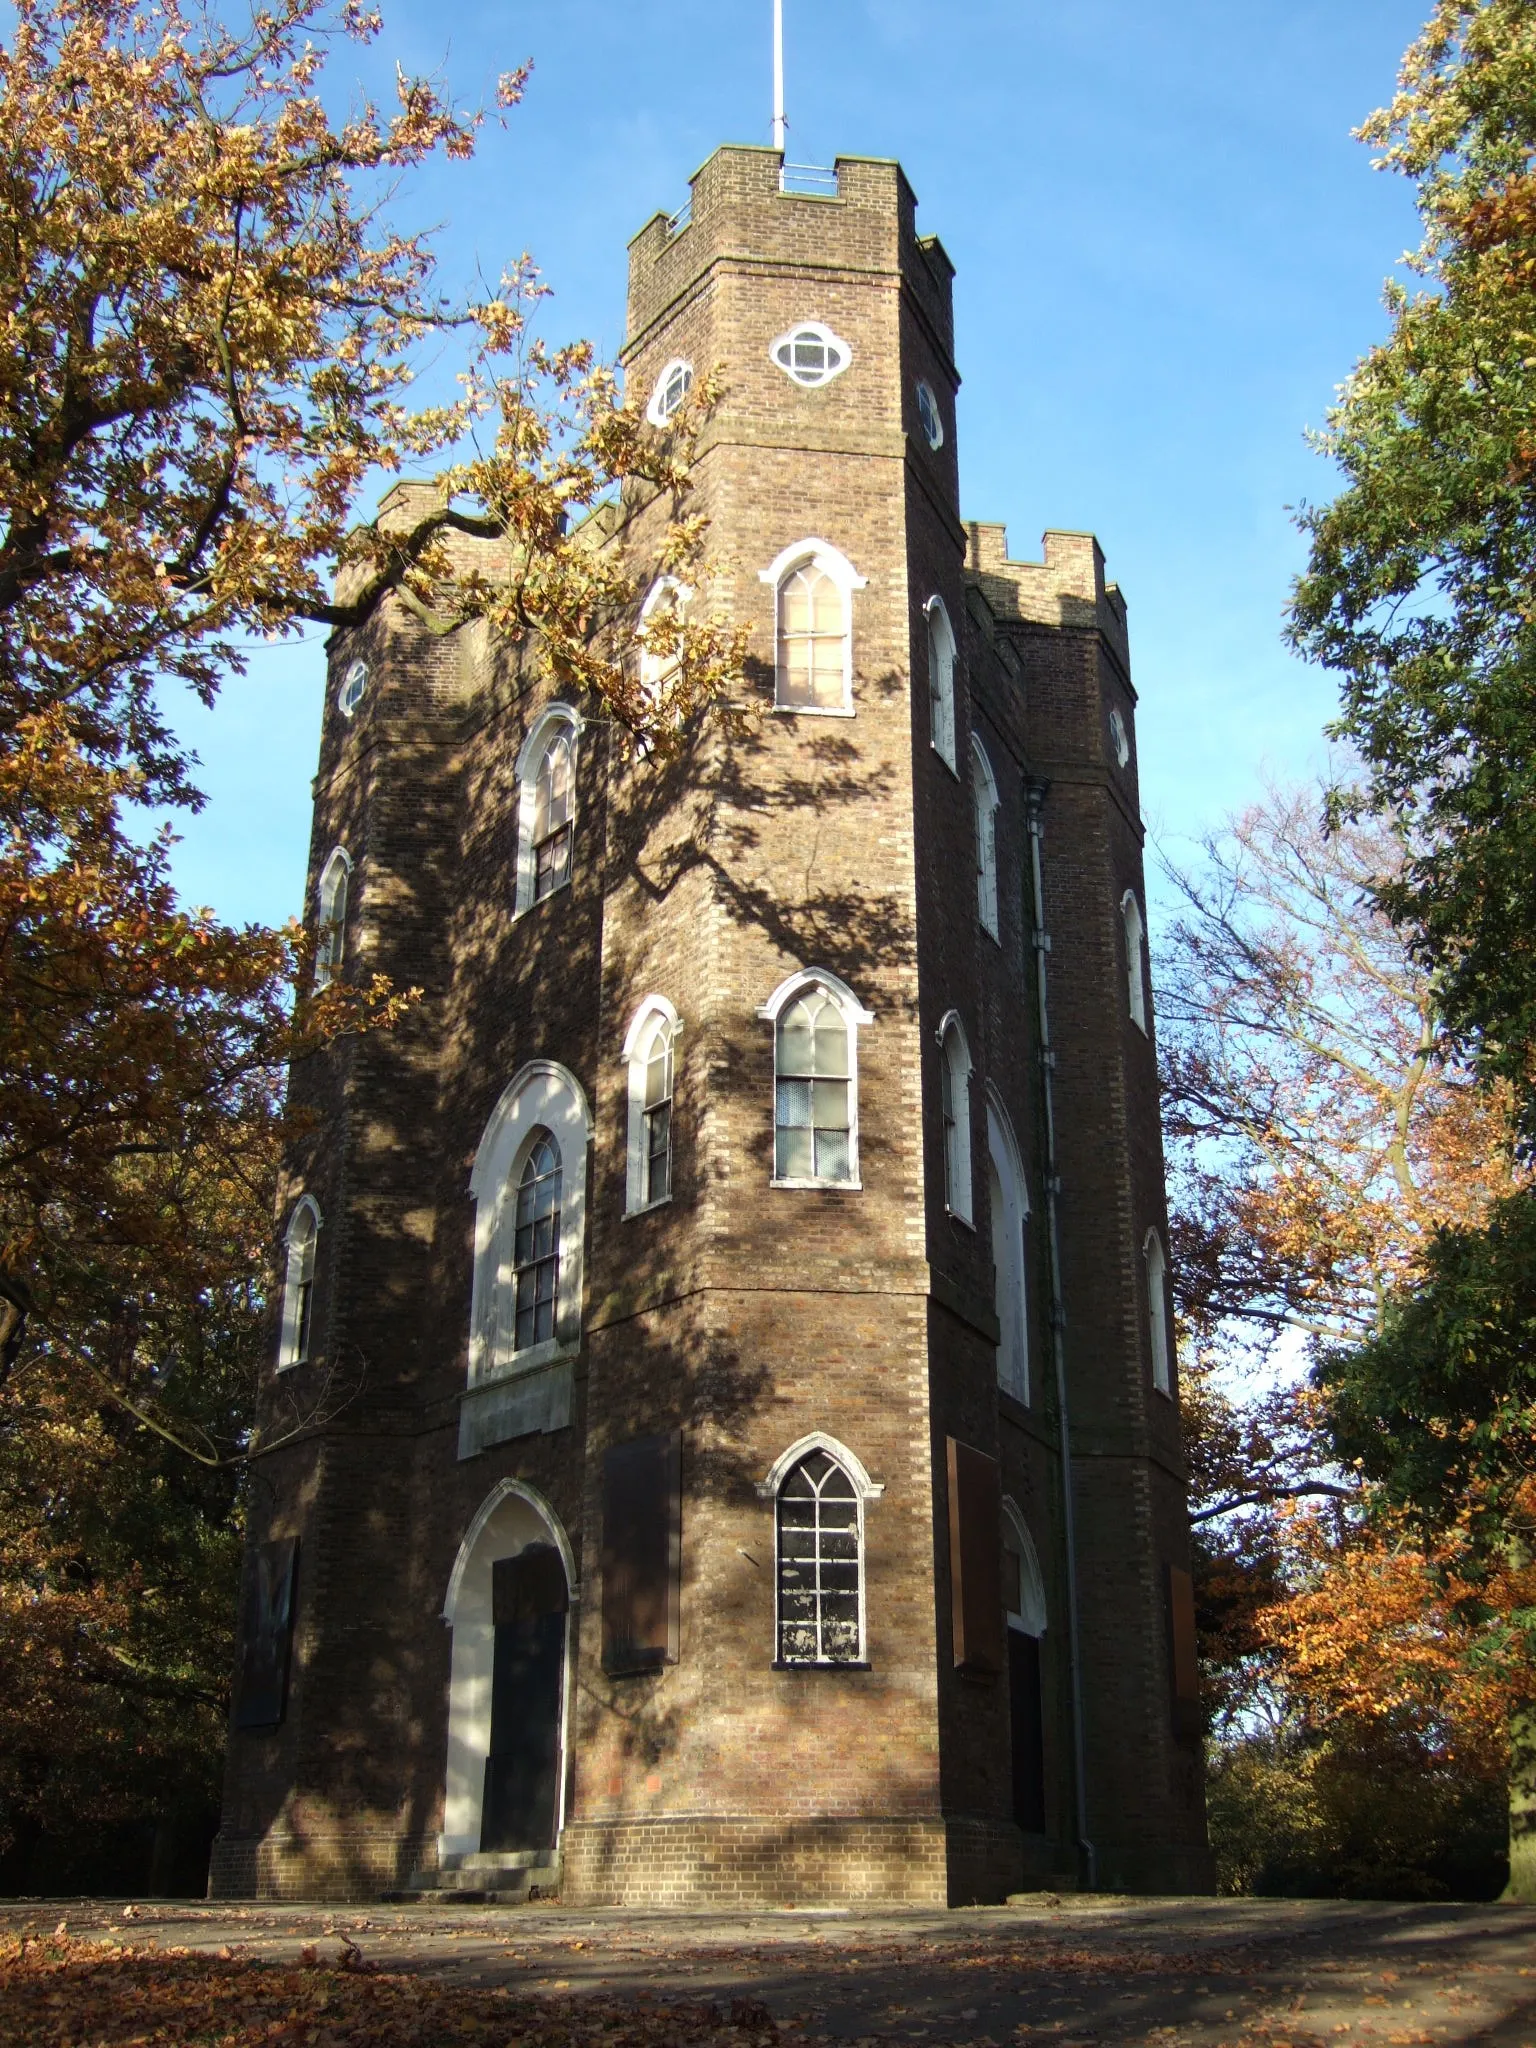 Photo showing: Severndroog Castle, Oxleas Wood, London.